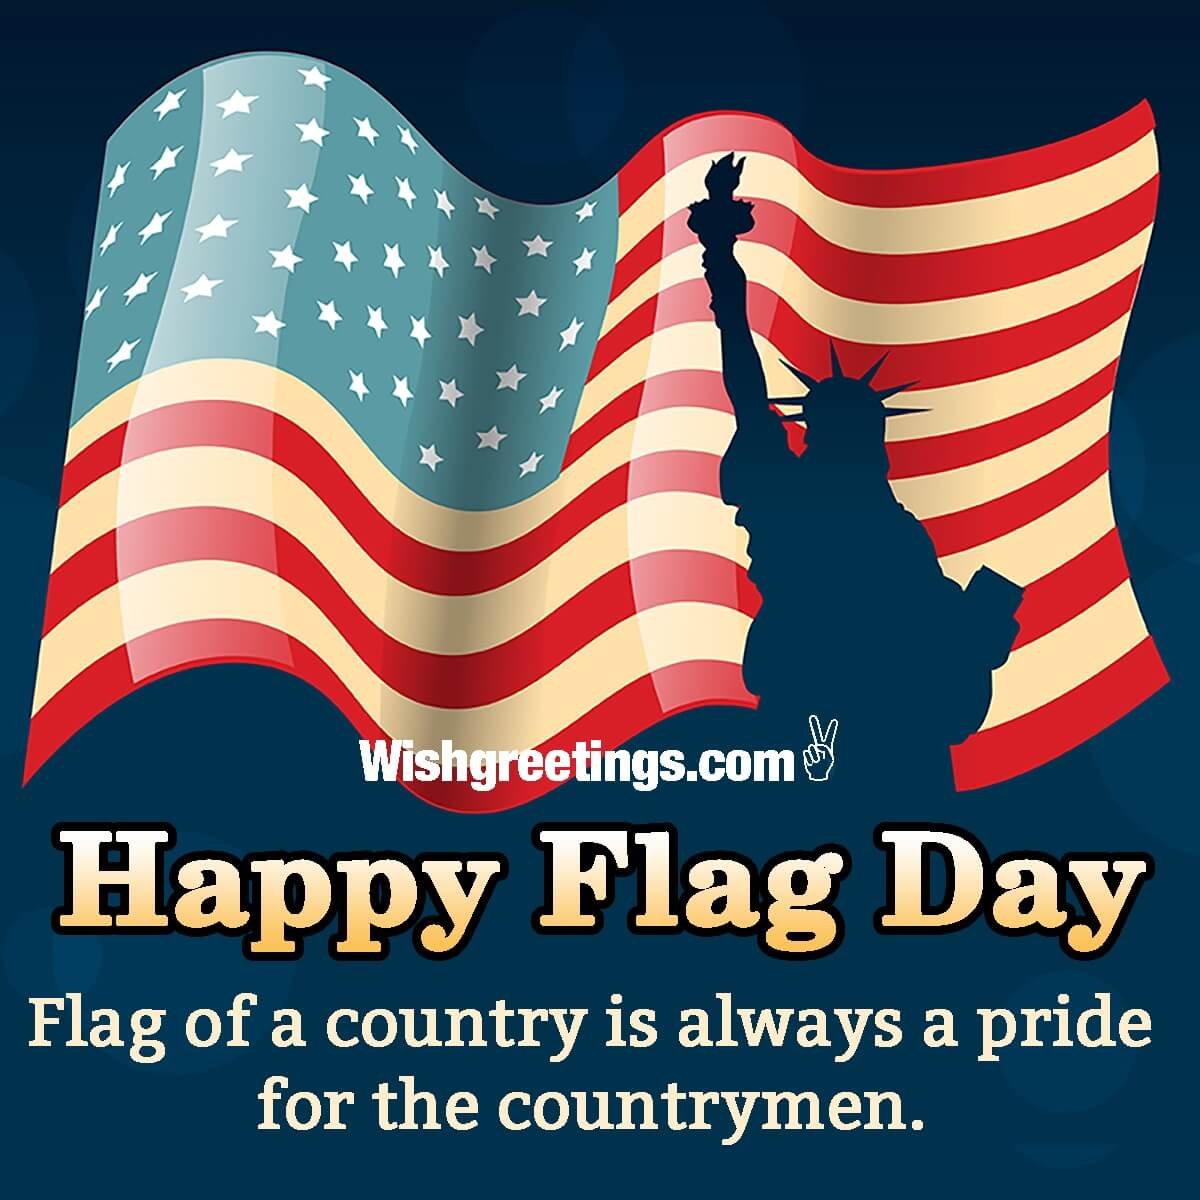 Flag Day Wishes Messages Wish Greetings